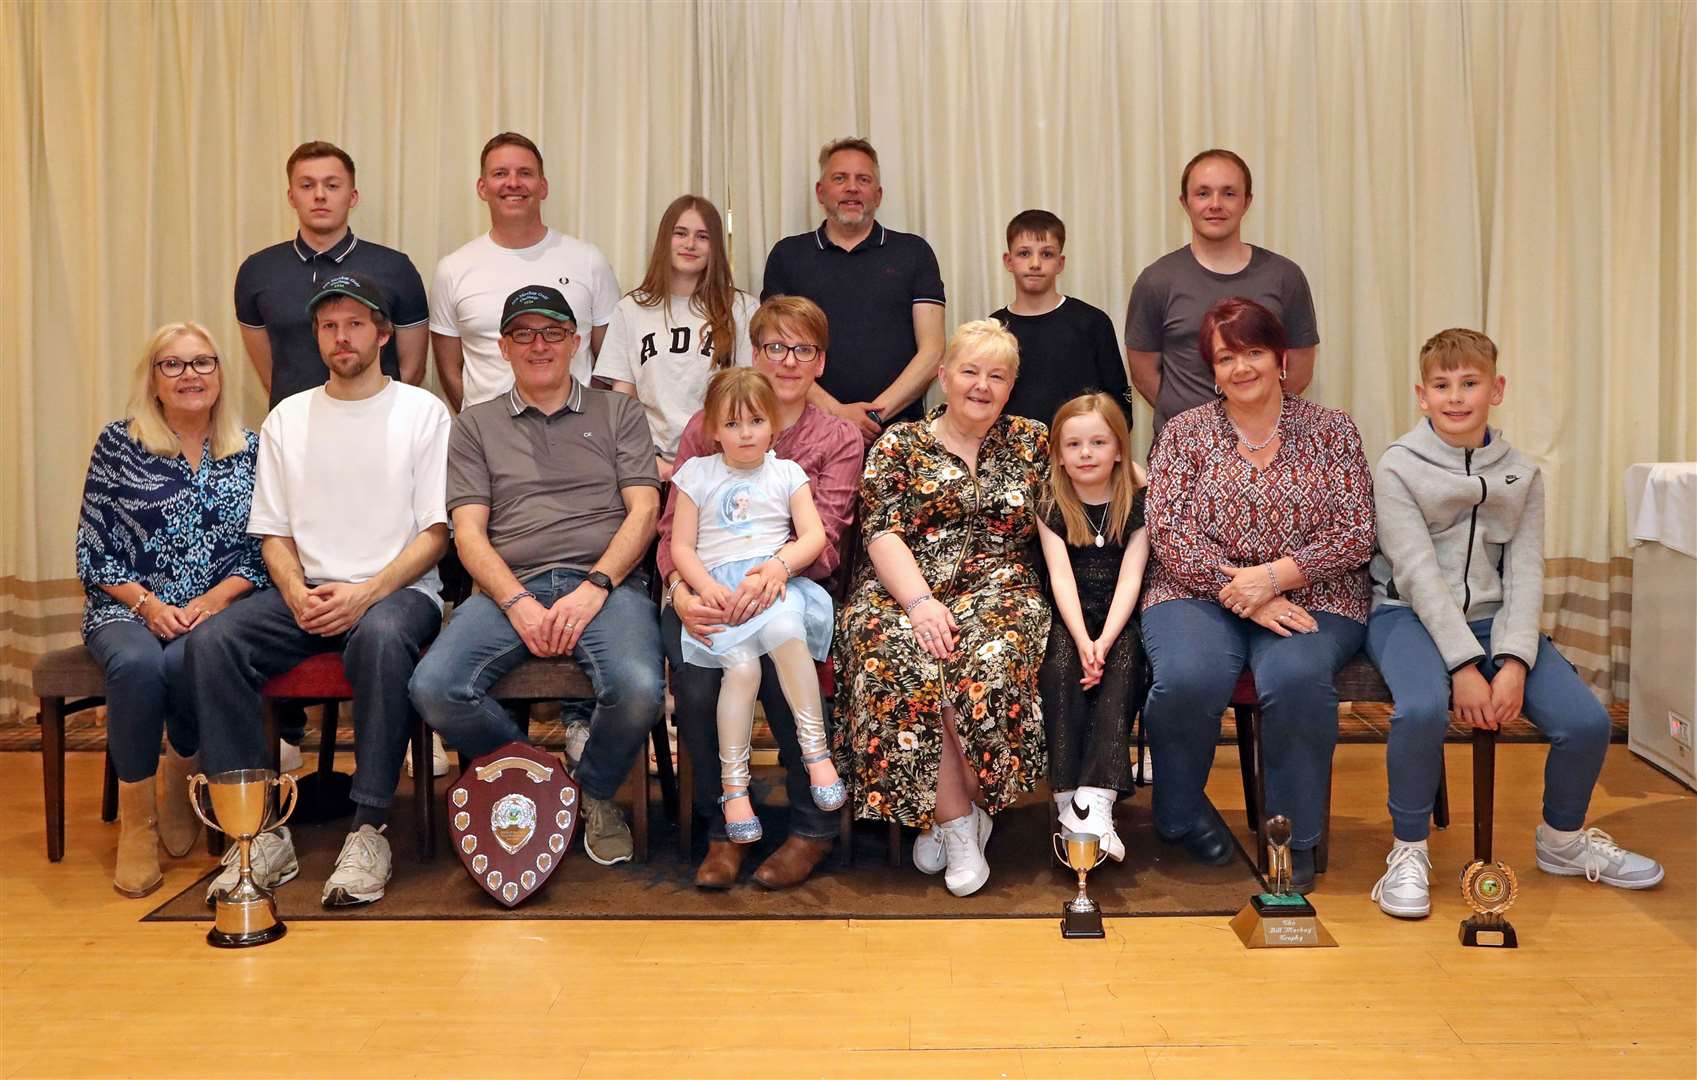 Prize-winners and family members with the memorial trophies after the annual Mackays’ Golf Challenge. Back (from left): Jonathan Mackay, Aly Mackay, Marianna Green, Doug Mackay, Logan Macadie and Richard Macadie. Front: Katrina Beesley, Douglas Mackay Jnr, Alec Green, Joanna and Kirsty Ross, Susan Banks, Chloe Banks, Lyndsay Macadie and Callum McInnes. Picture: James Gunn